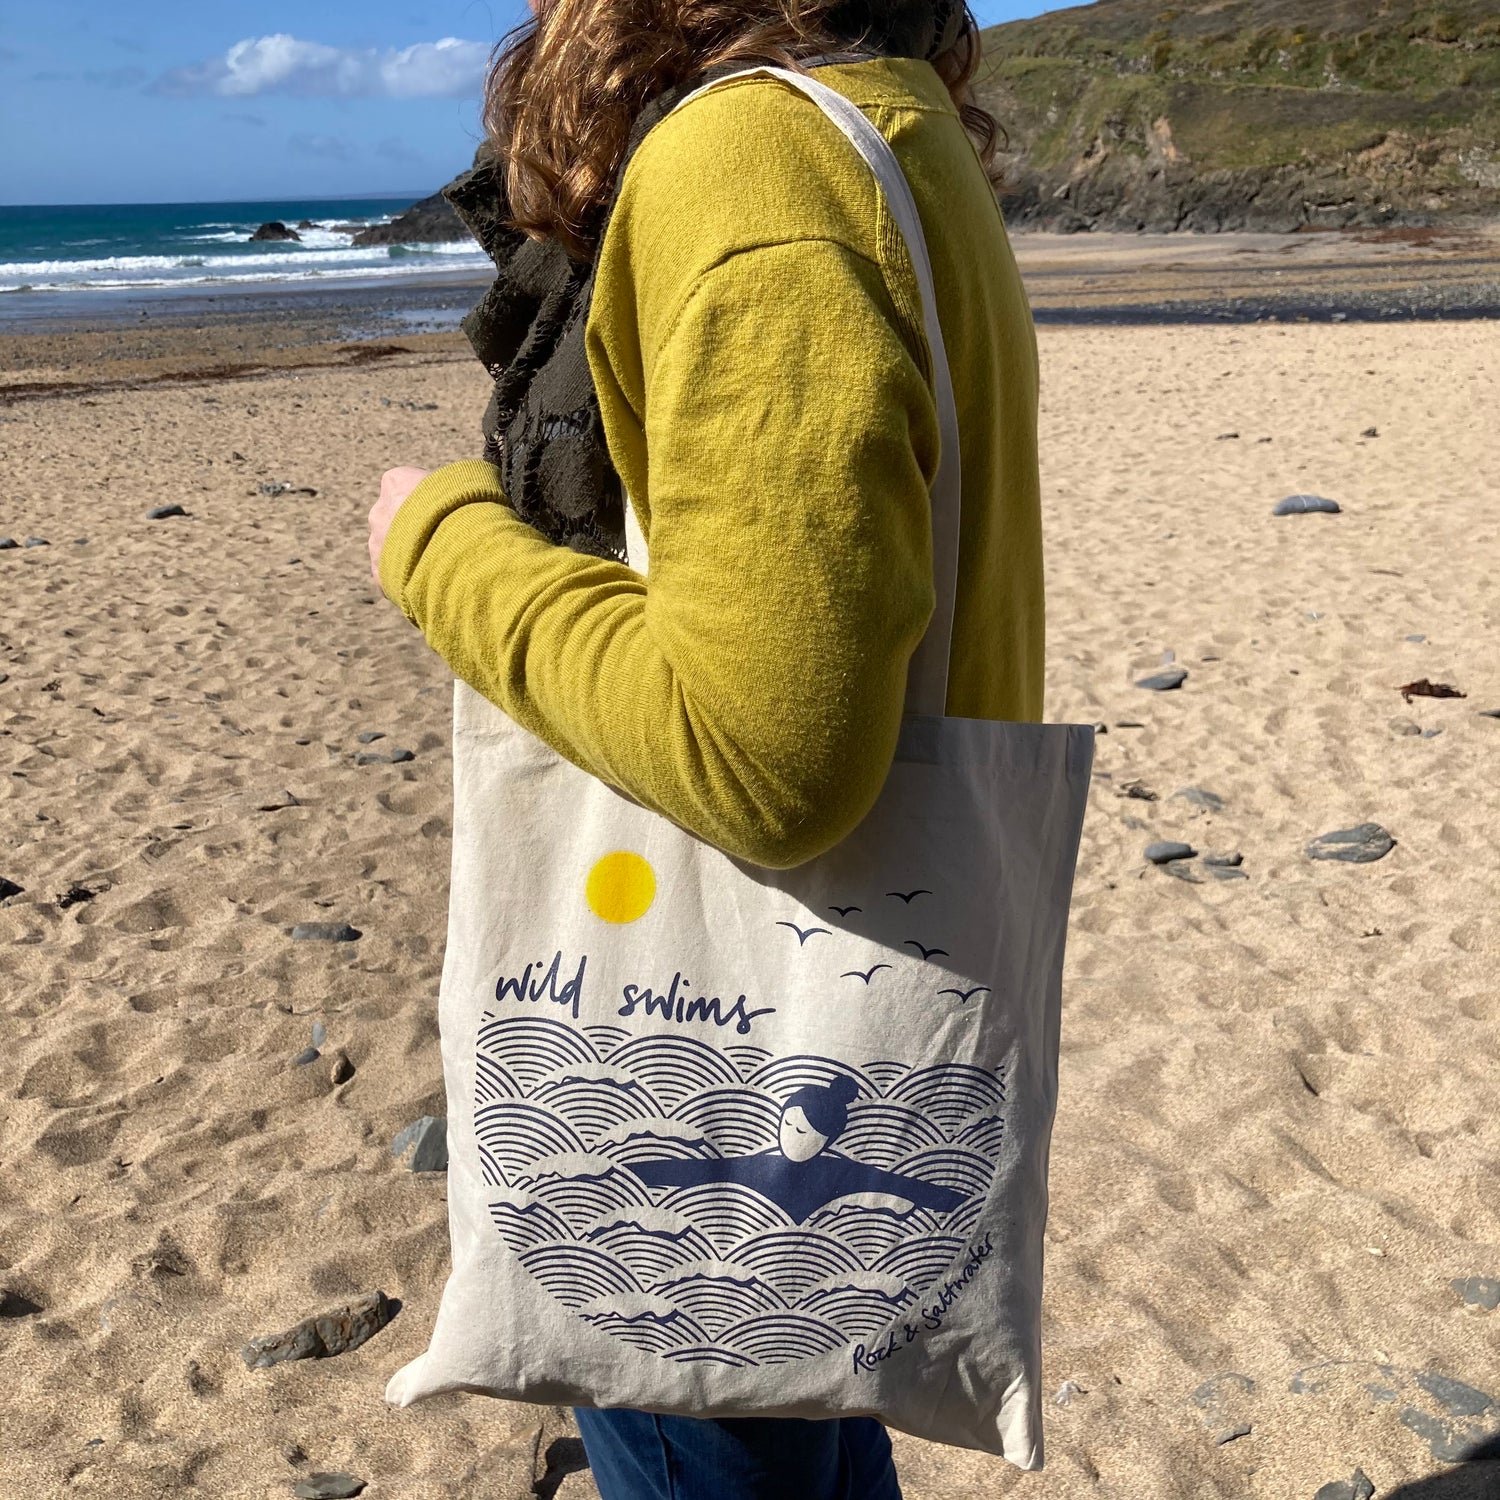 Figure stood on the beach looking out to see, wearing a yellow top with a natural 'wild swims' cotton tote bag over her shoulder. 